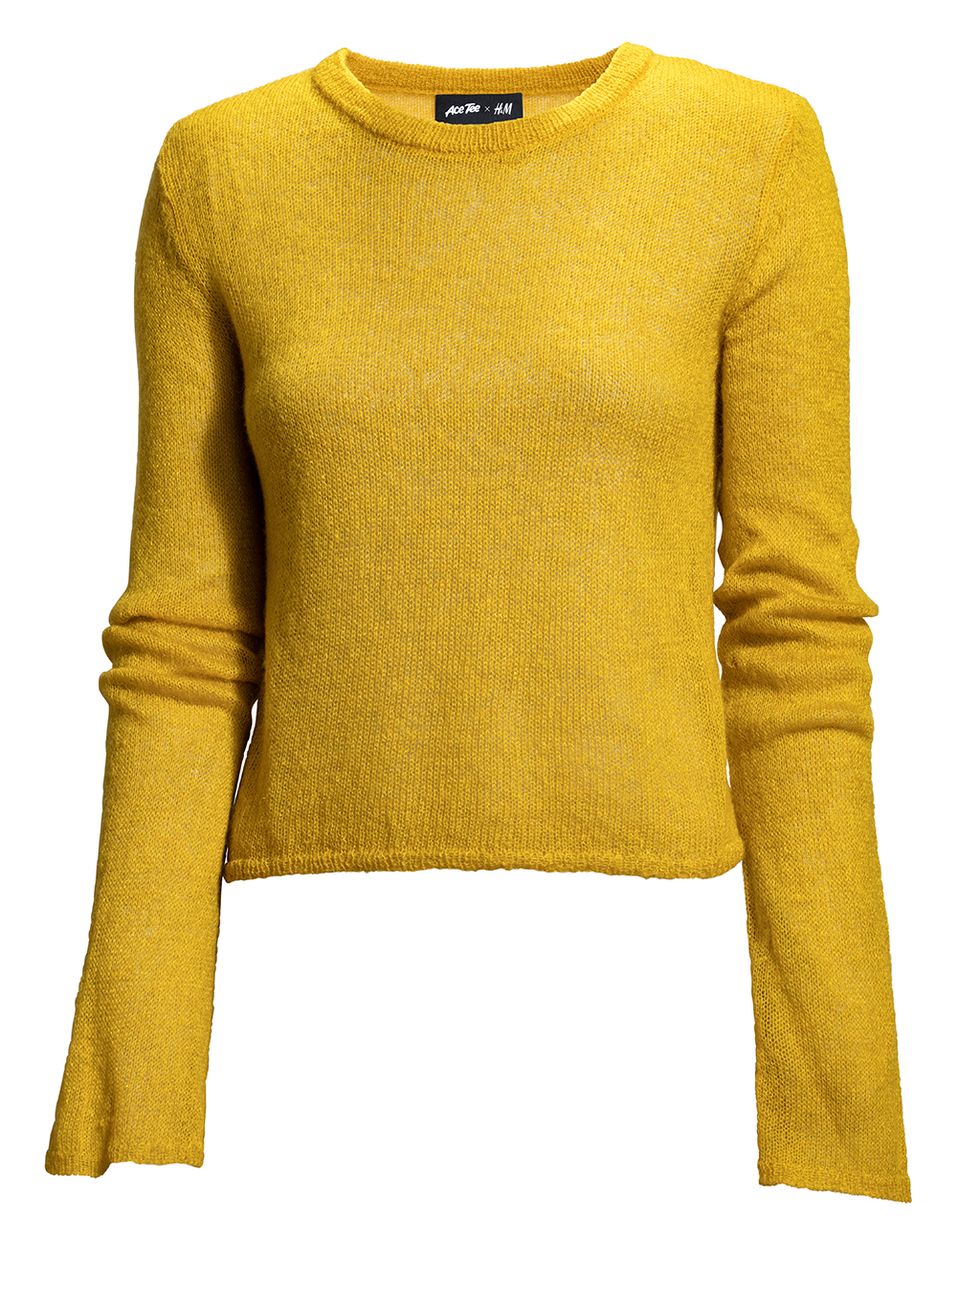 Clothing, Yellow, Sleeve, Outerwear, Long-sleeved t-shirt, Sweater, Neck, Top, T-shirt, Jersey, 